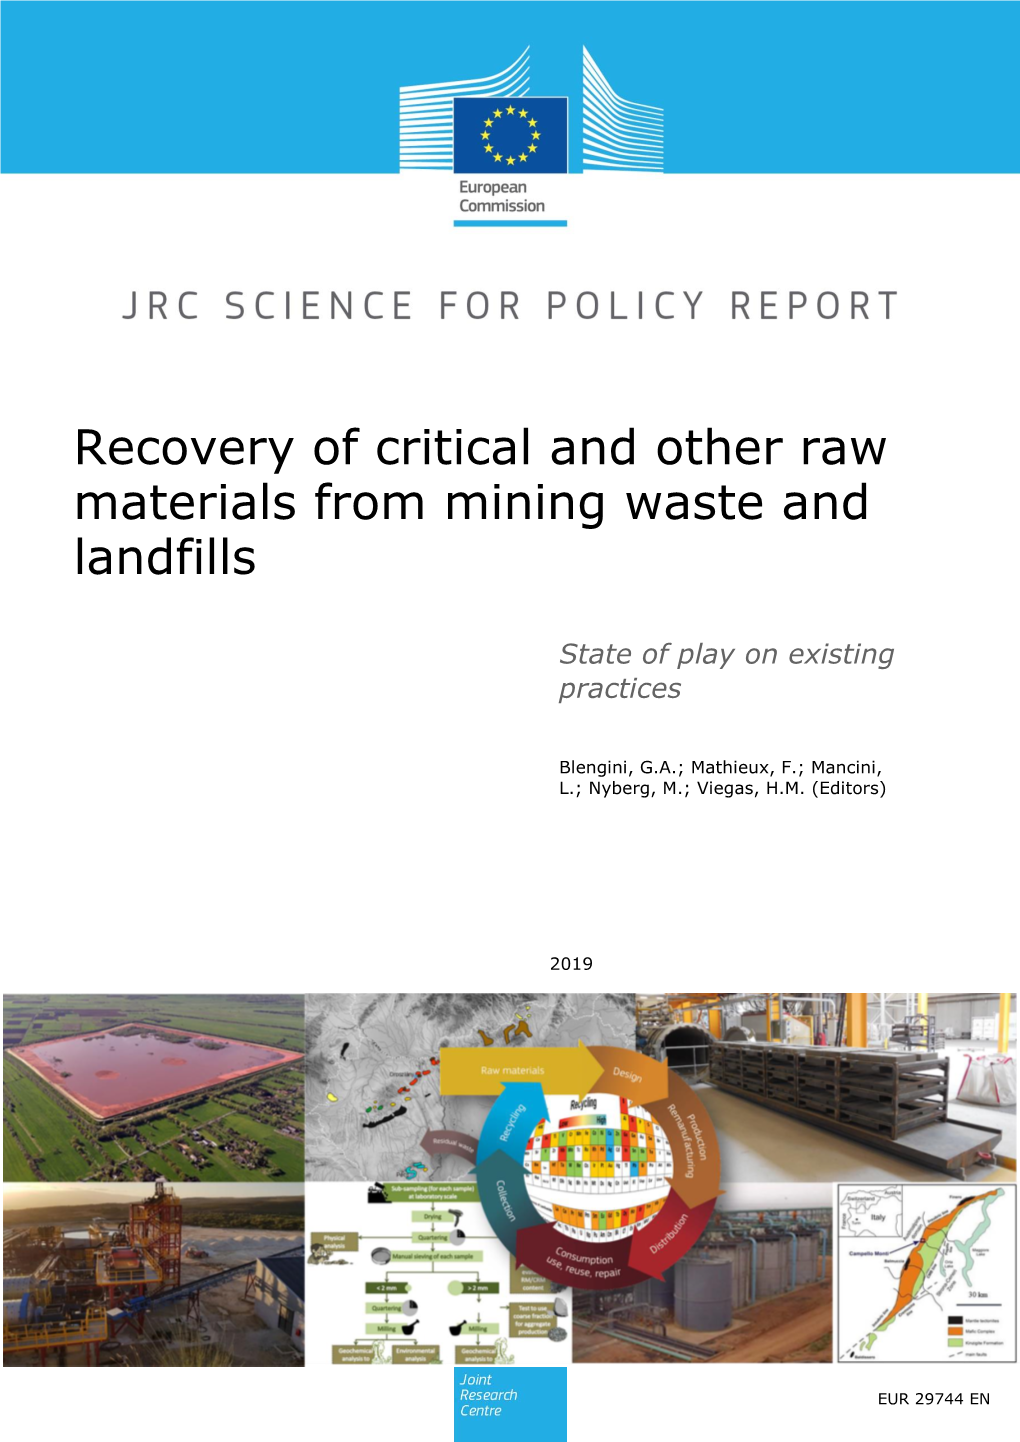 Recovery of Critical and Other Raw Materials from Mining Waste and Landfills